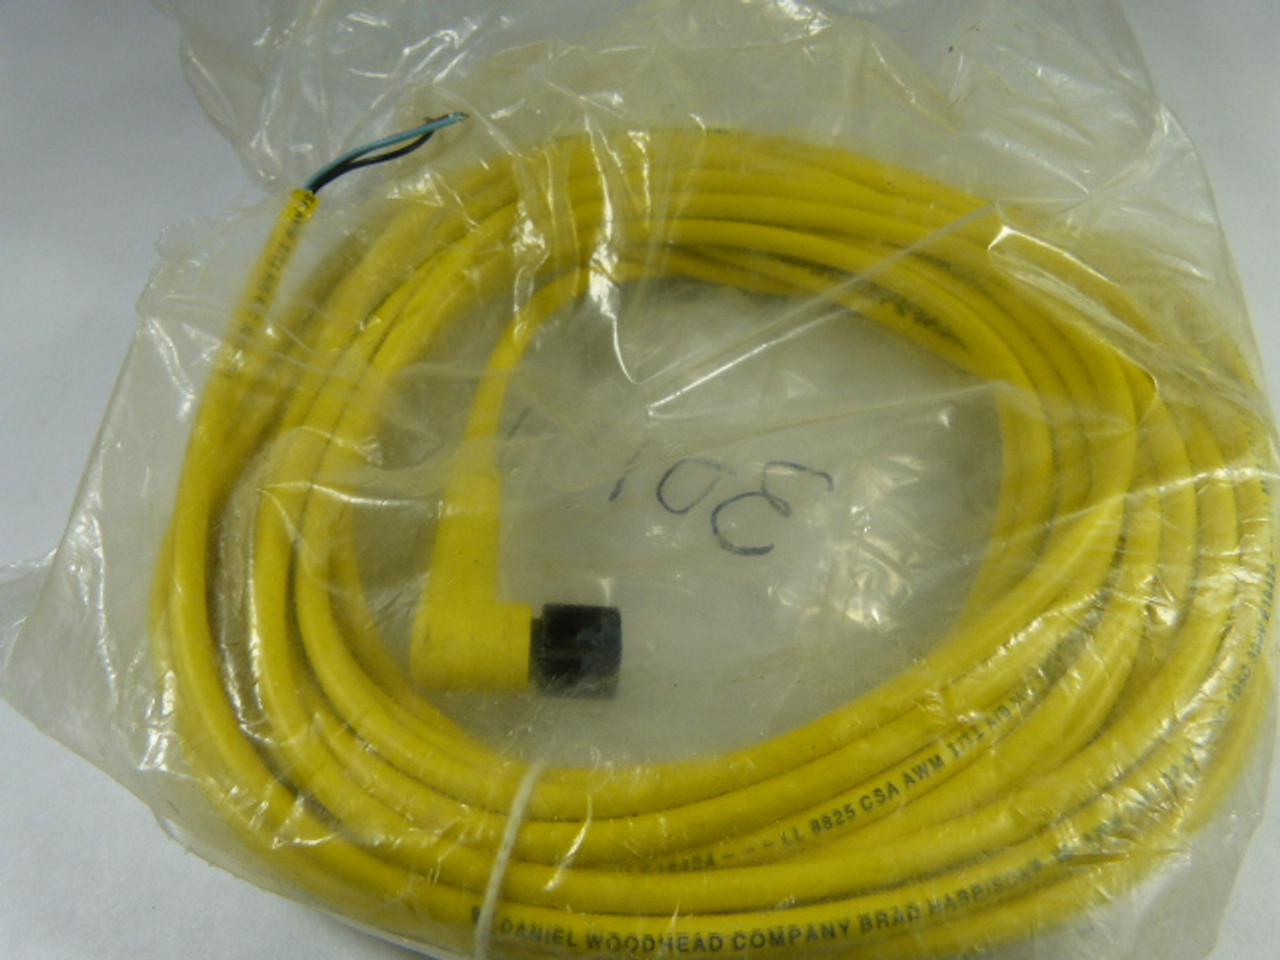 Brad Harrison 803001A09M100 Female Cable Assembly ! NWB !